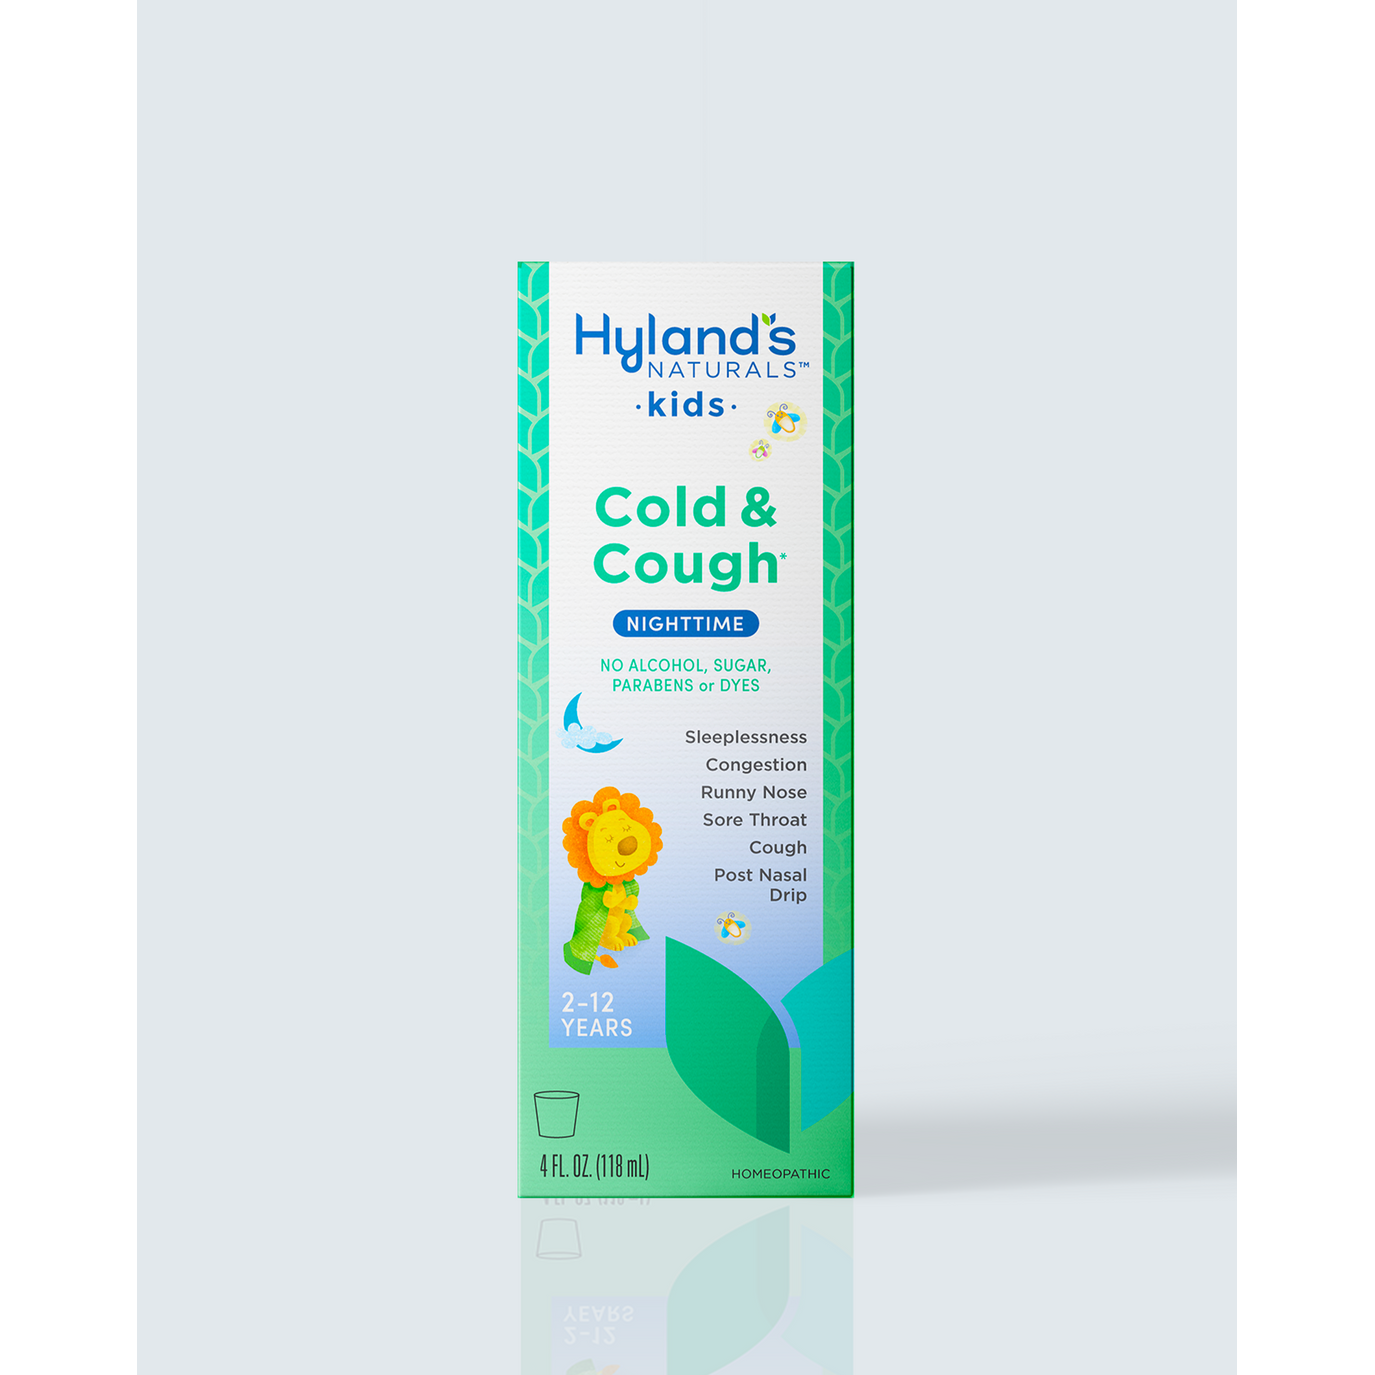 HYLAND'S 4 KIDS COLD 'N COUGH NIGHTIME